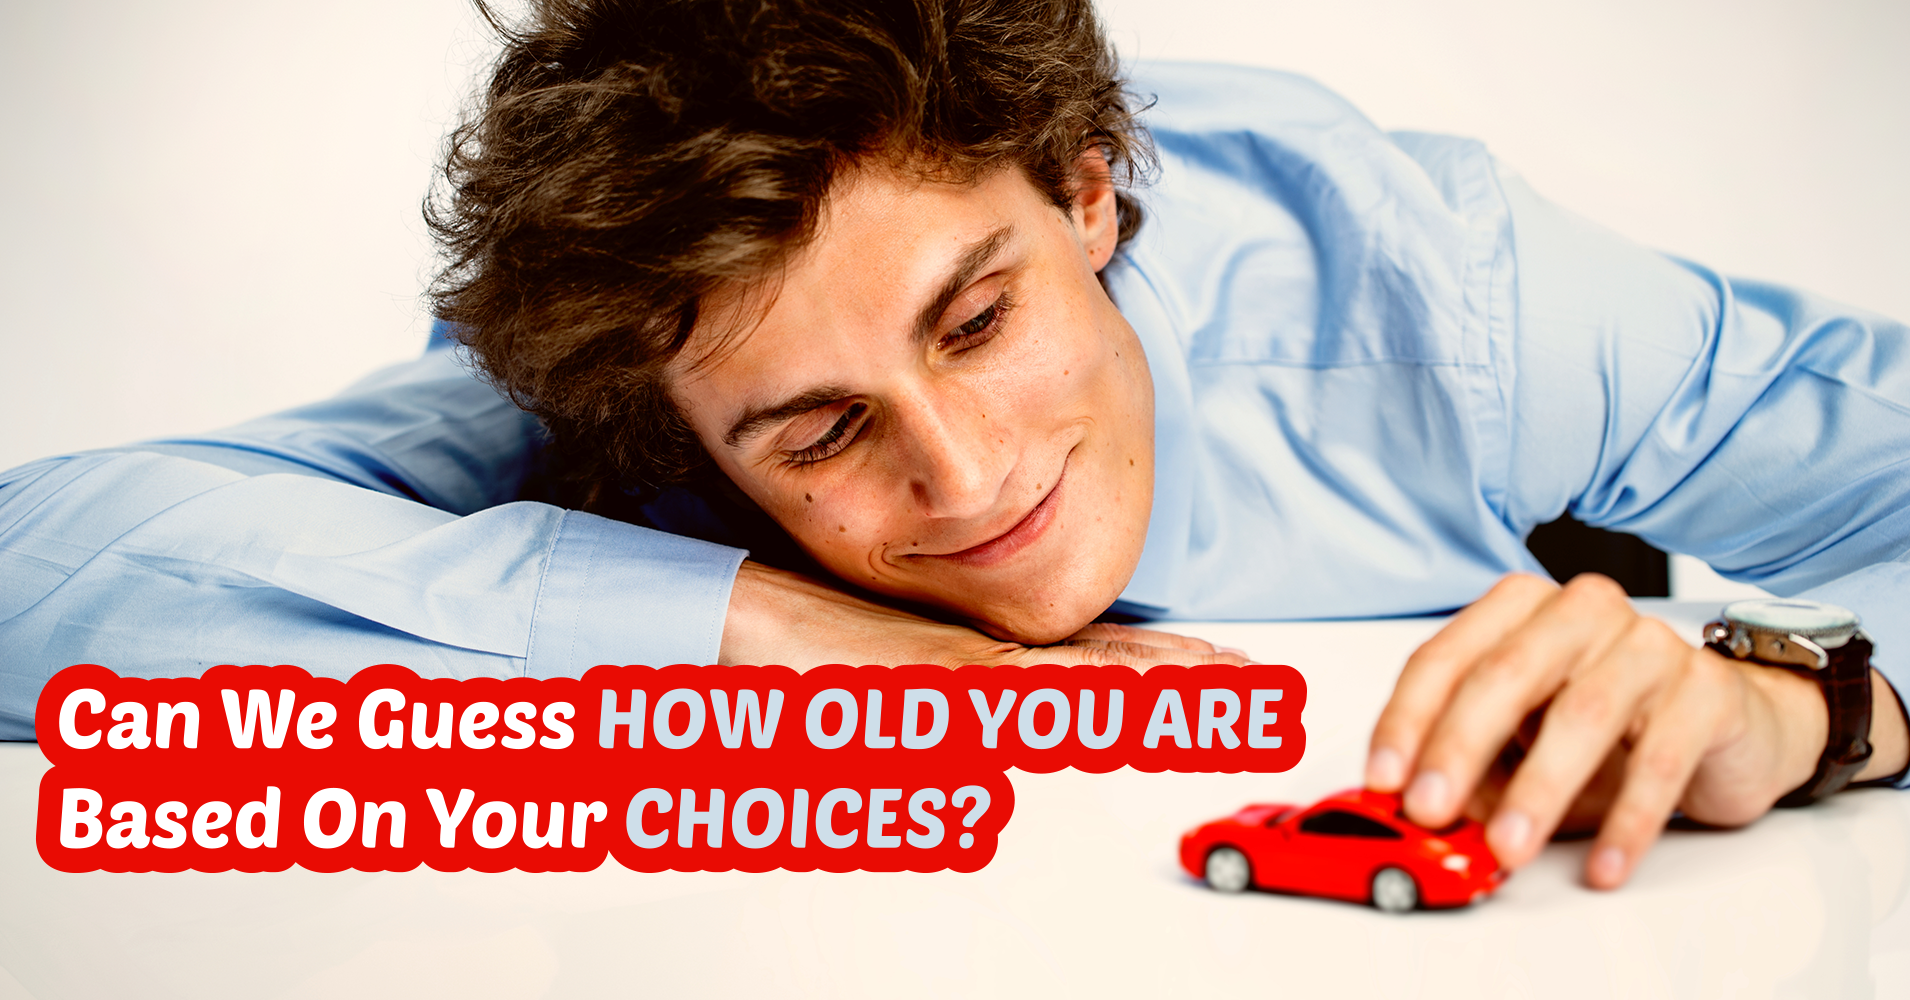 reservedele svale hjemme Can We Guess How Old You Are Based On Your Choices? - Quiz - Quizony.com